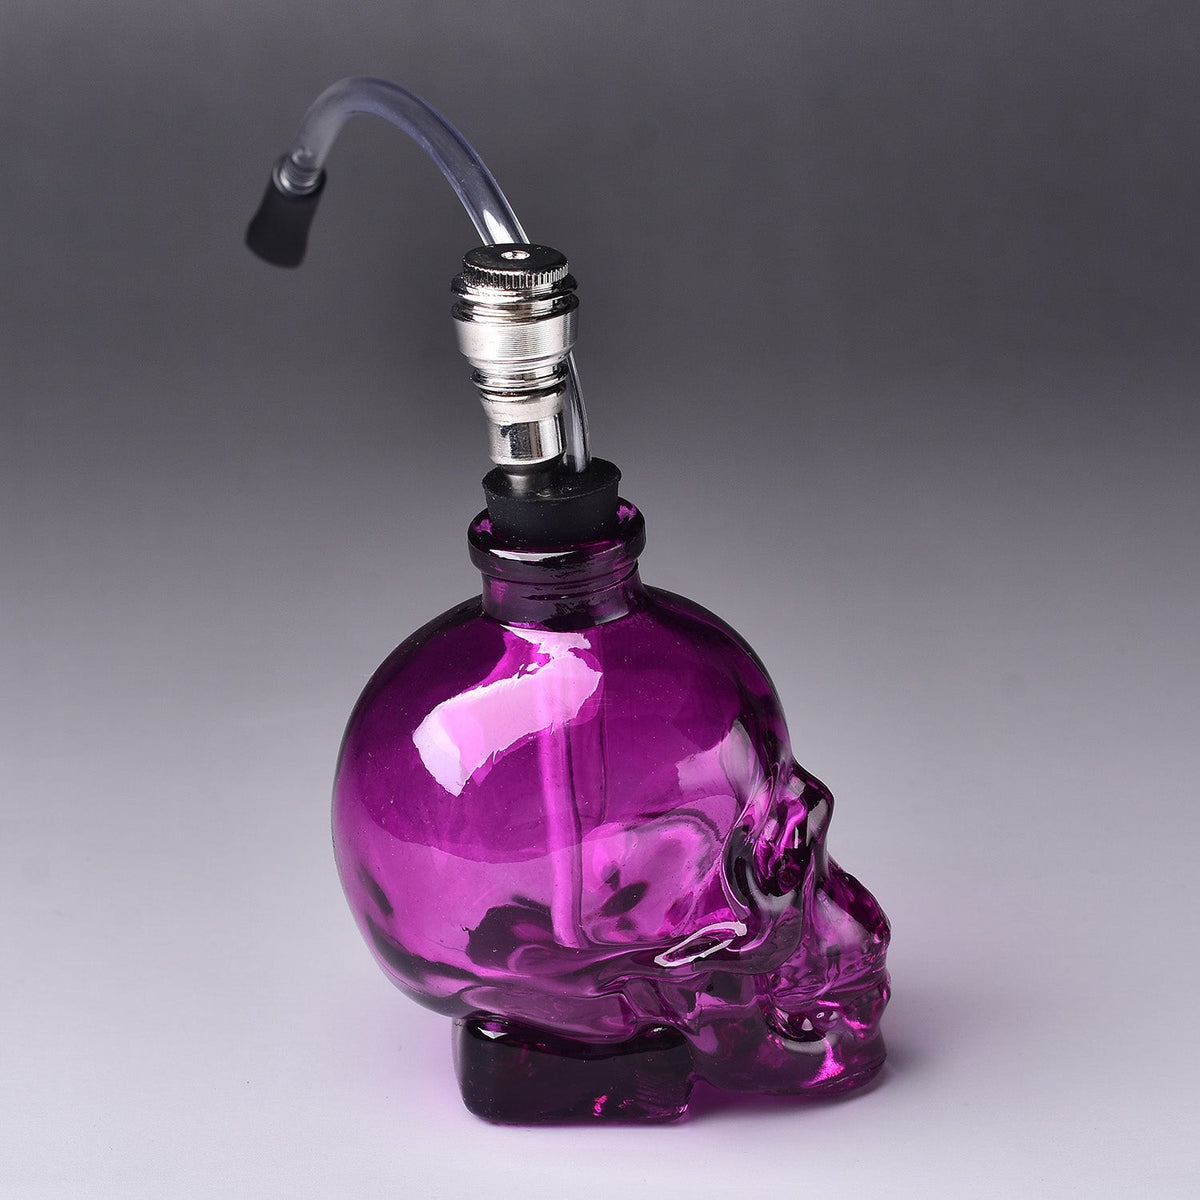 Wholesale Colorful Purple Iridescent Skull Hookah Bubbler With Glass  Recycler And Filter For Tobacco, Perc, Wax, And Water Pipe Accessories From  Glass99, $22.95